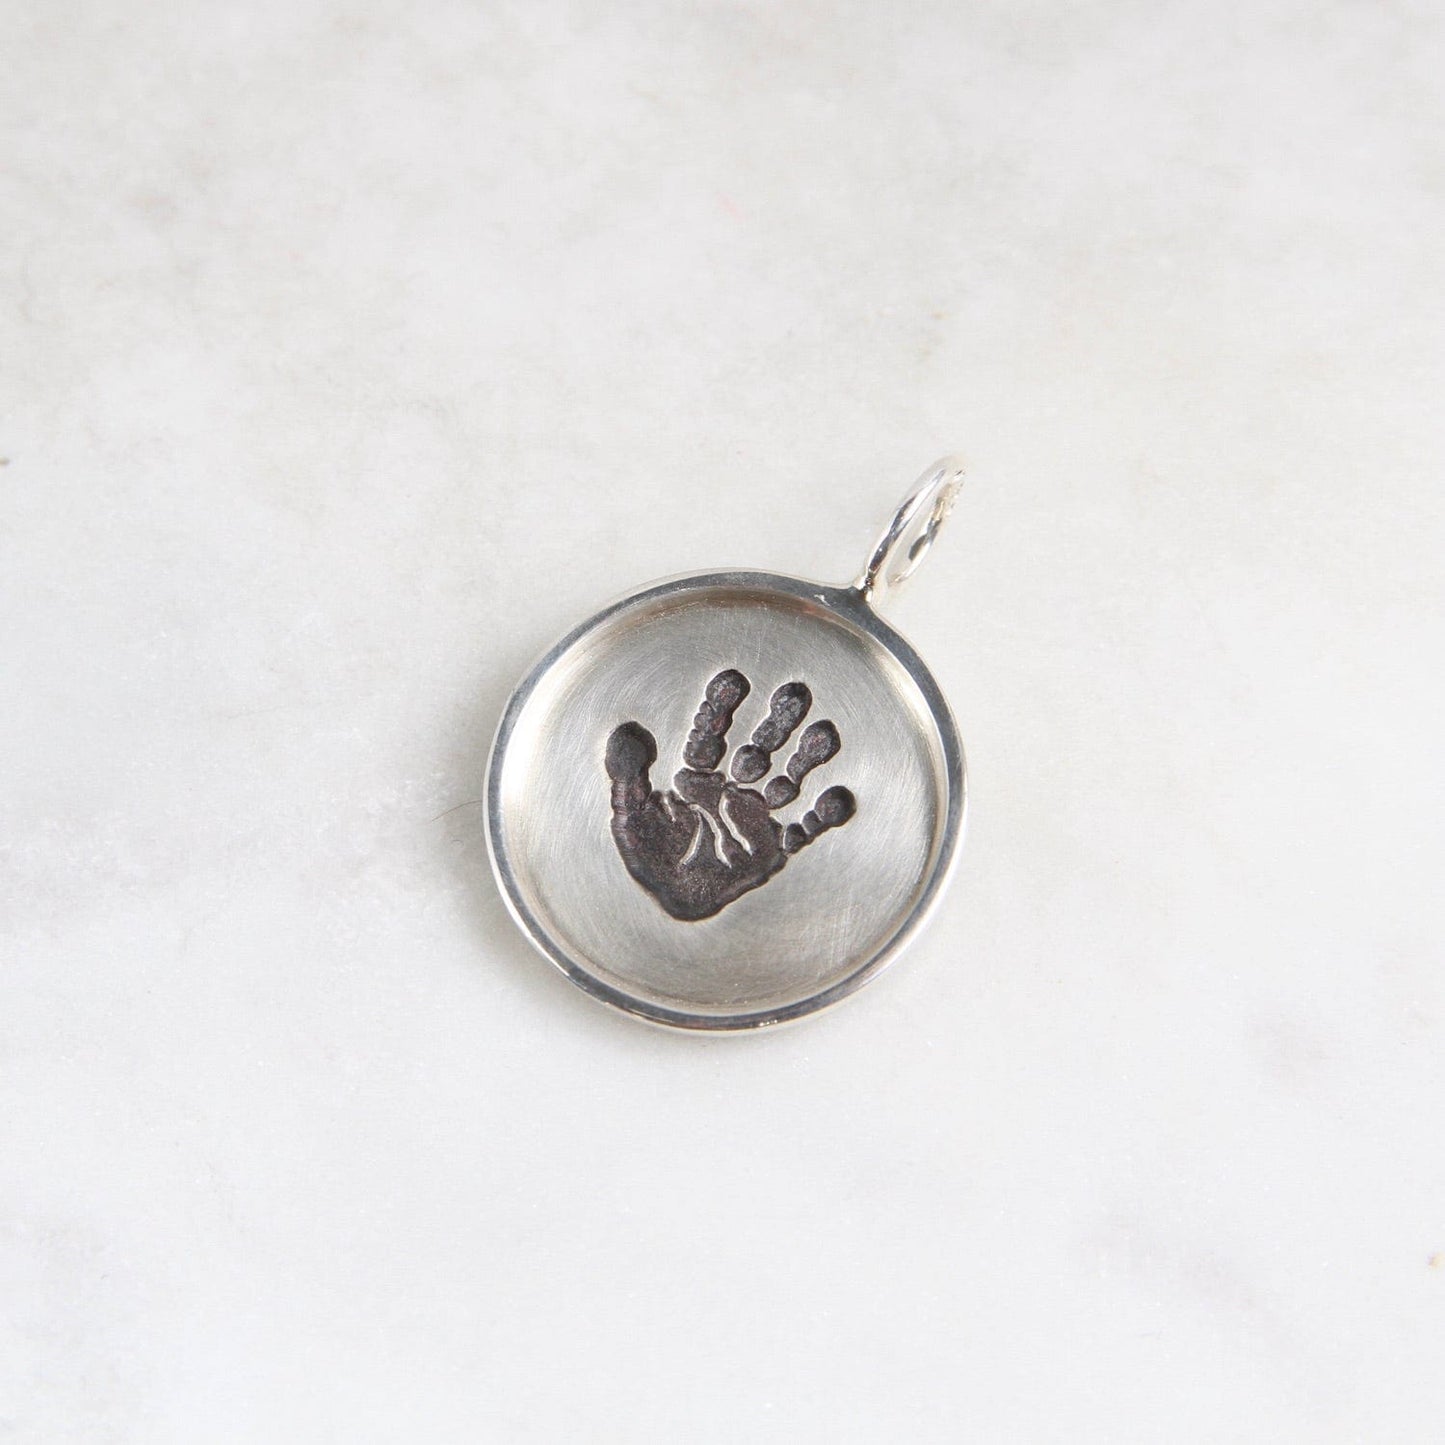 CHM Handprint Small Silver Round Disc with Silver Frame Charm